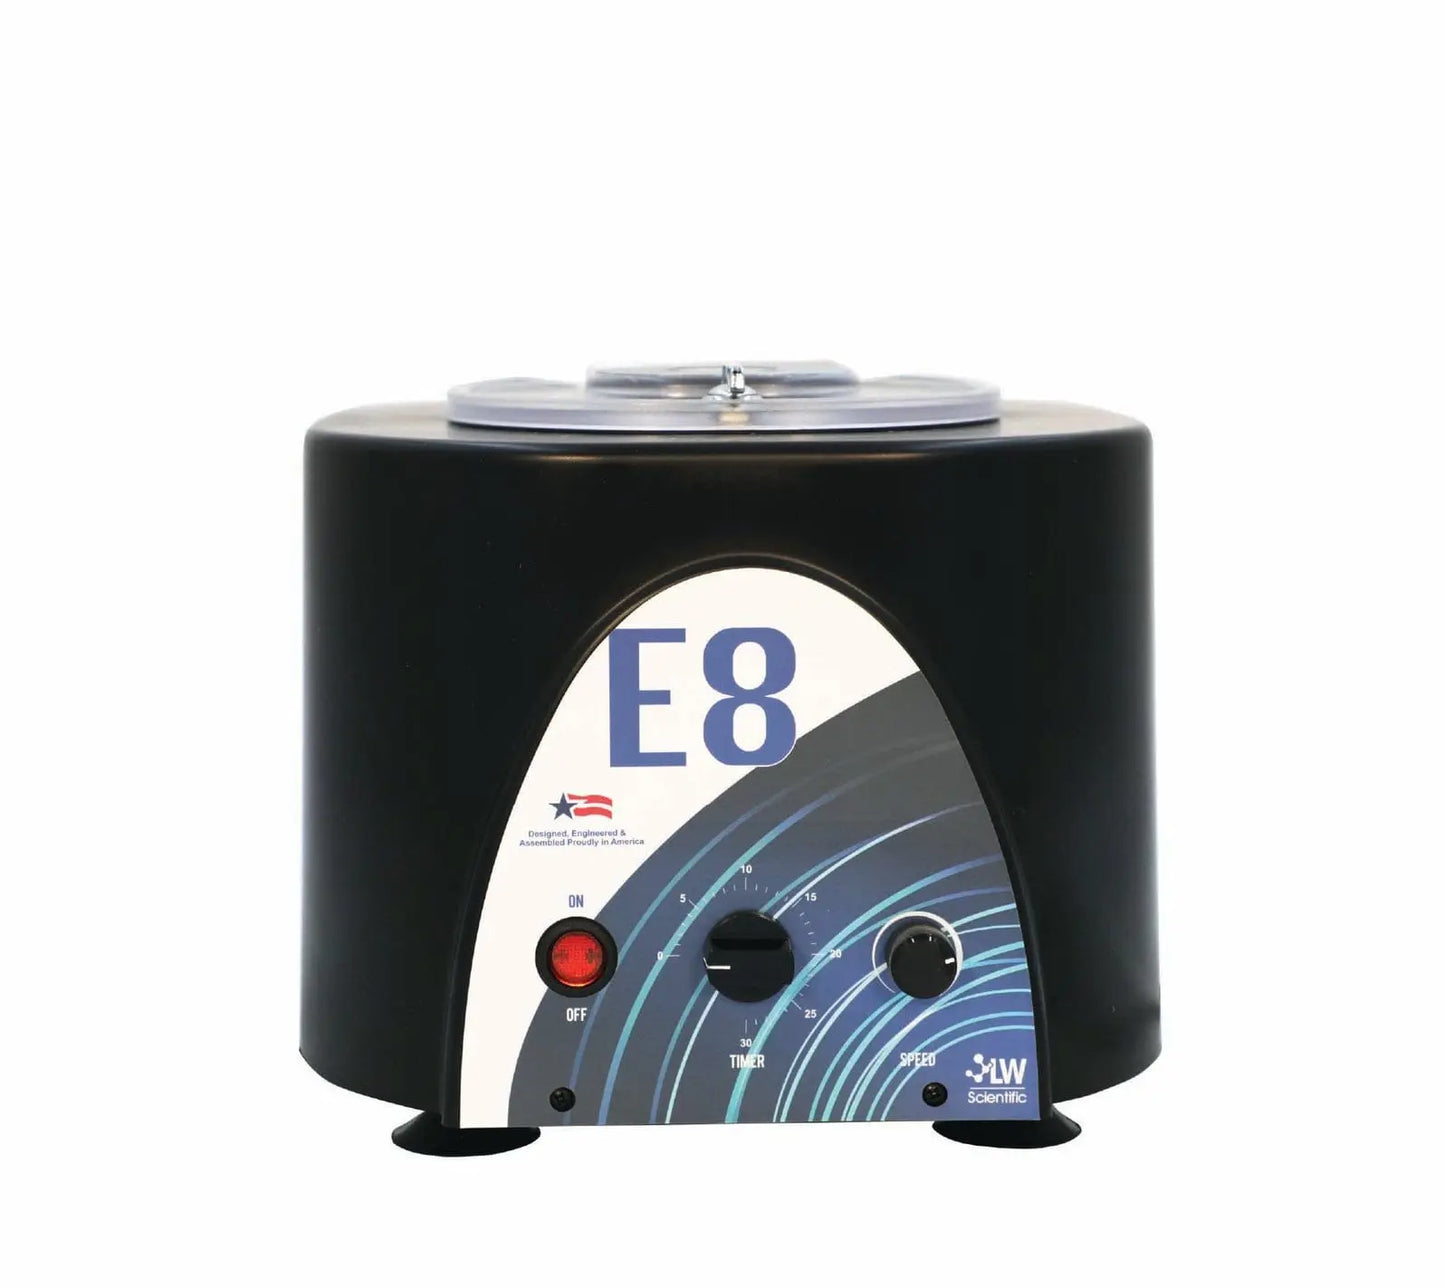 E8 Combination Centrifuge (Spins Test Tubes, Microhematocrit Tubes, and Micro Tubes) - LabEssentials, Inc.